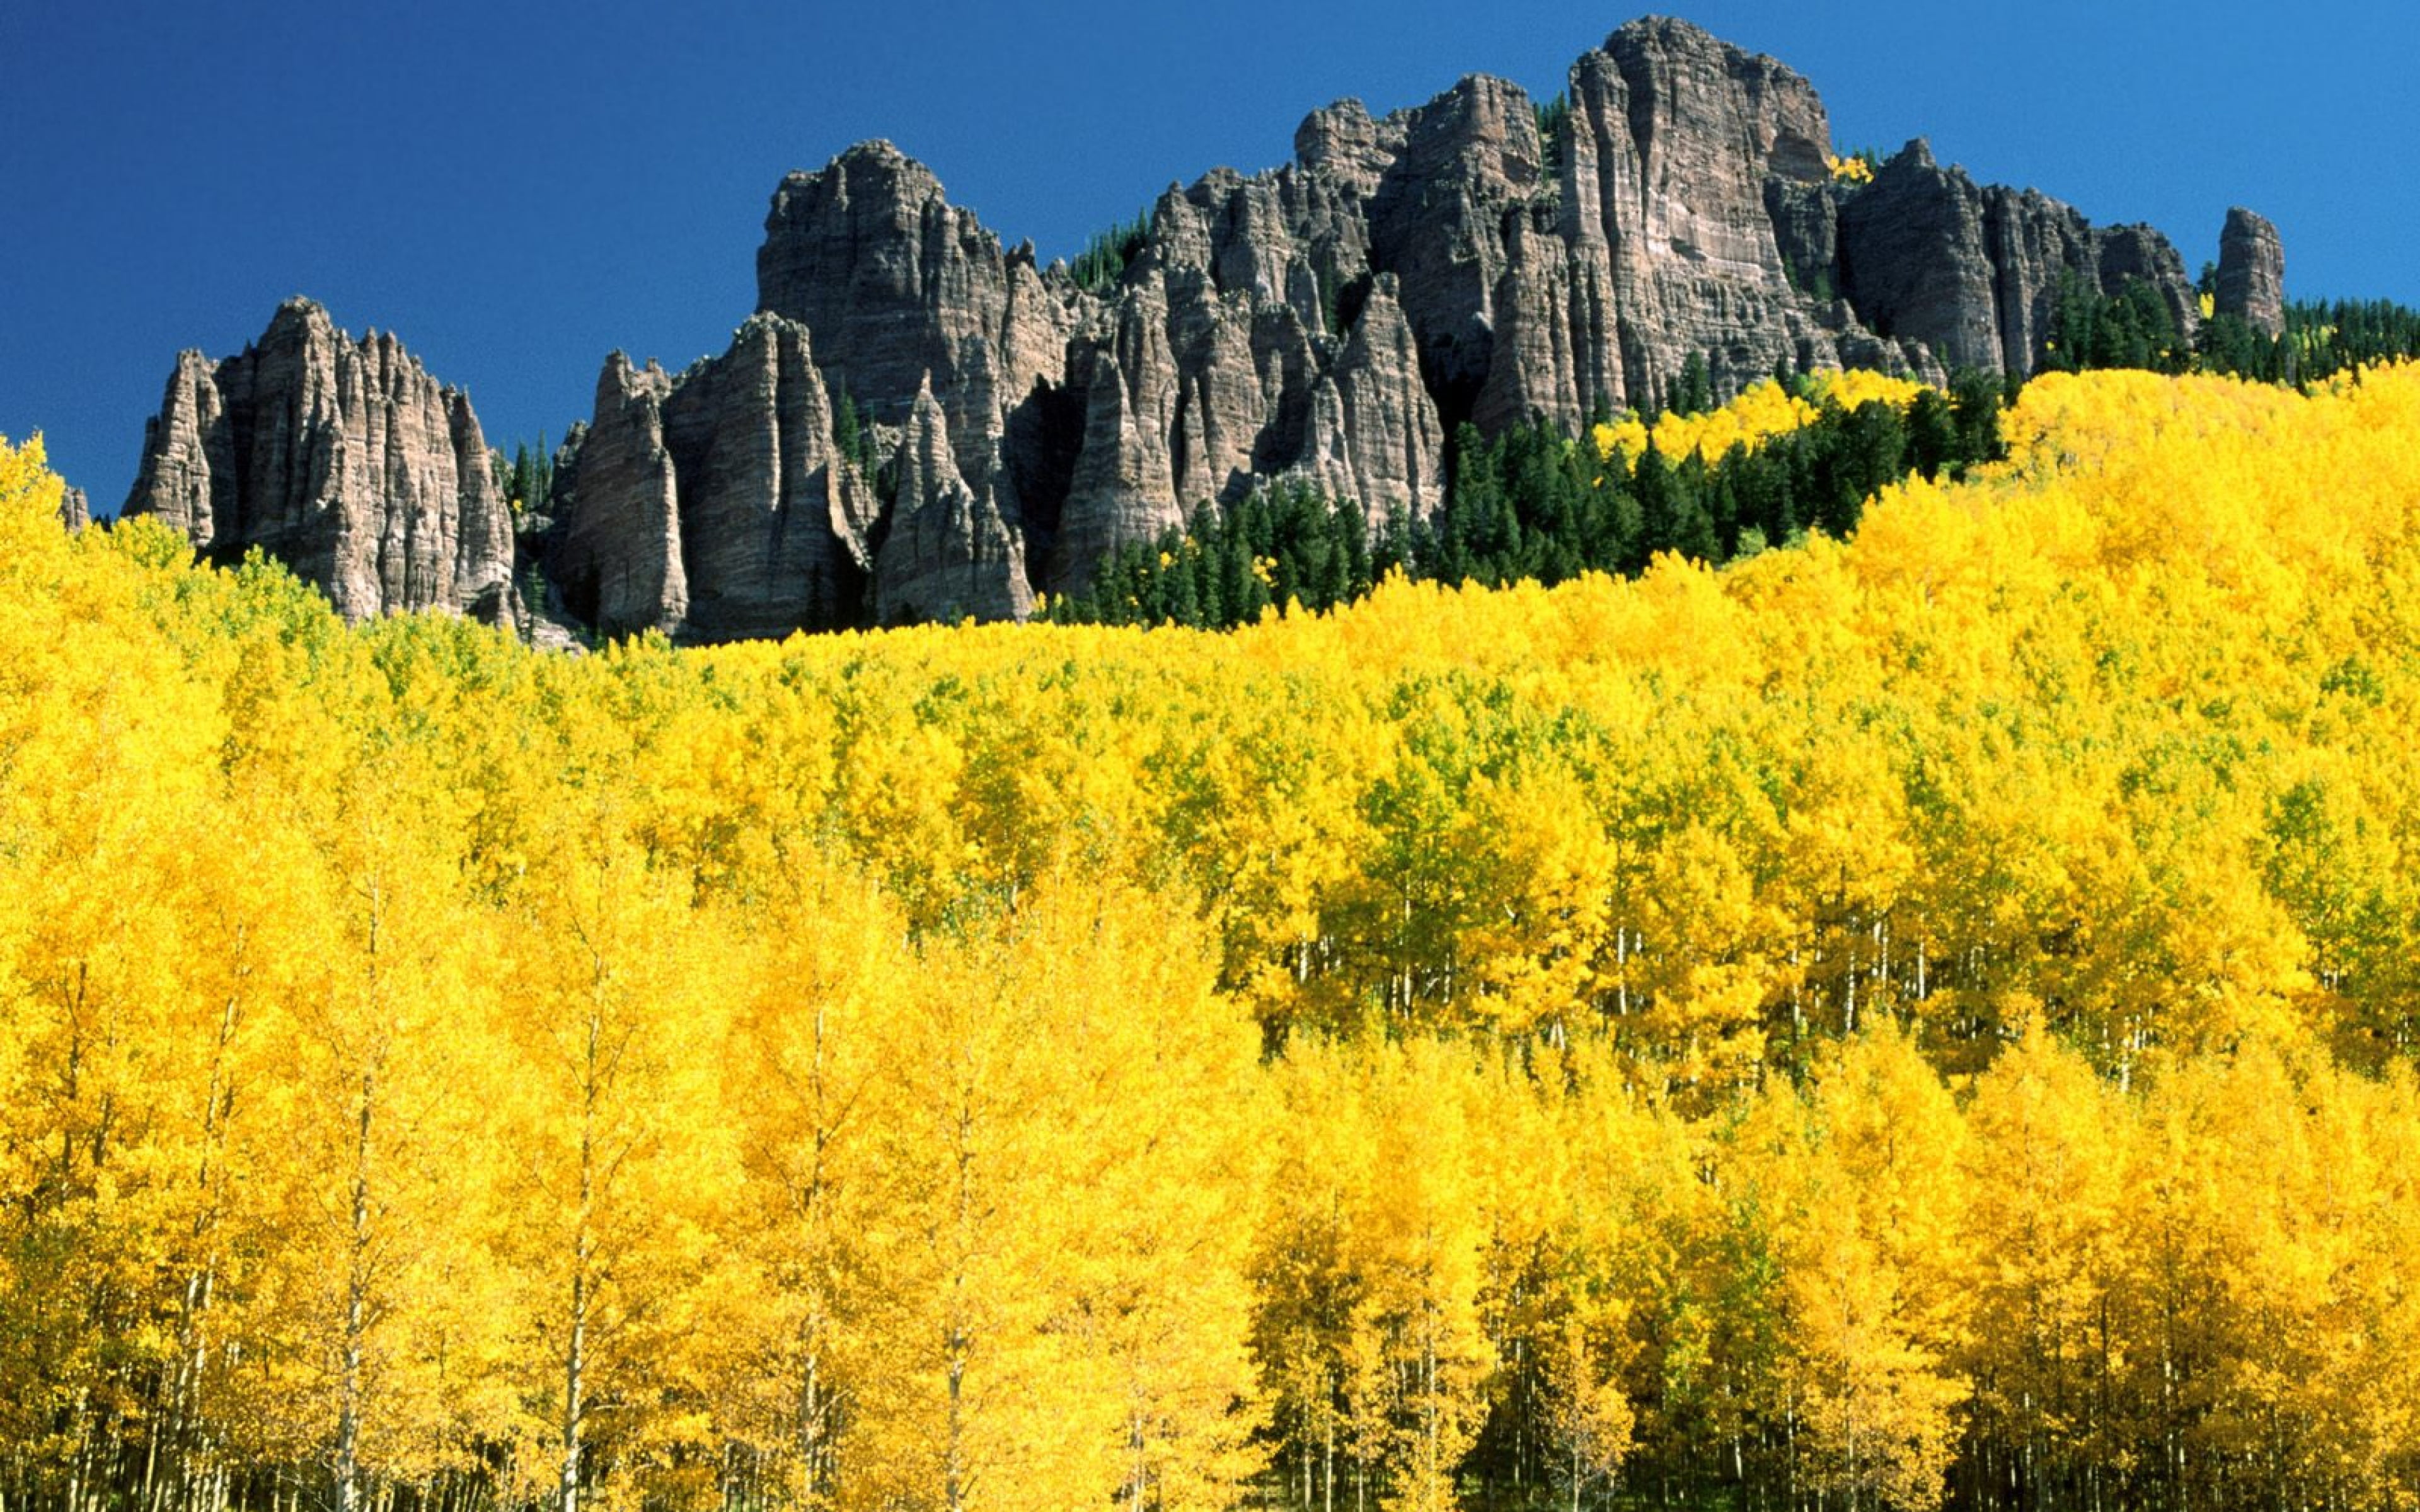 Colorado Yellow Mountain Forest Birch Trees With Autumn Golden Yellow Rocky Peaks Of Mountains Usa Desktop Wallpaper Hd 3840×2400